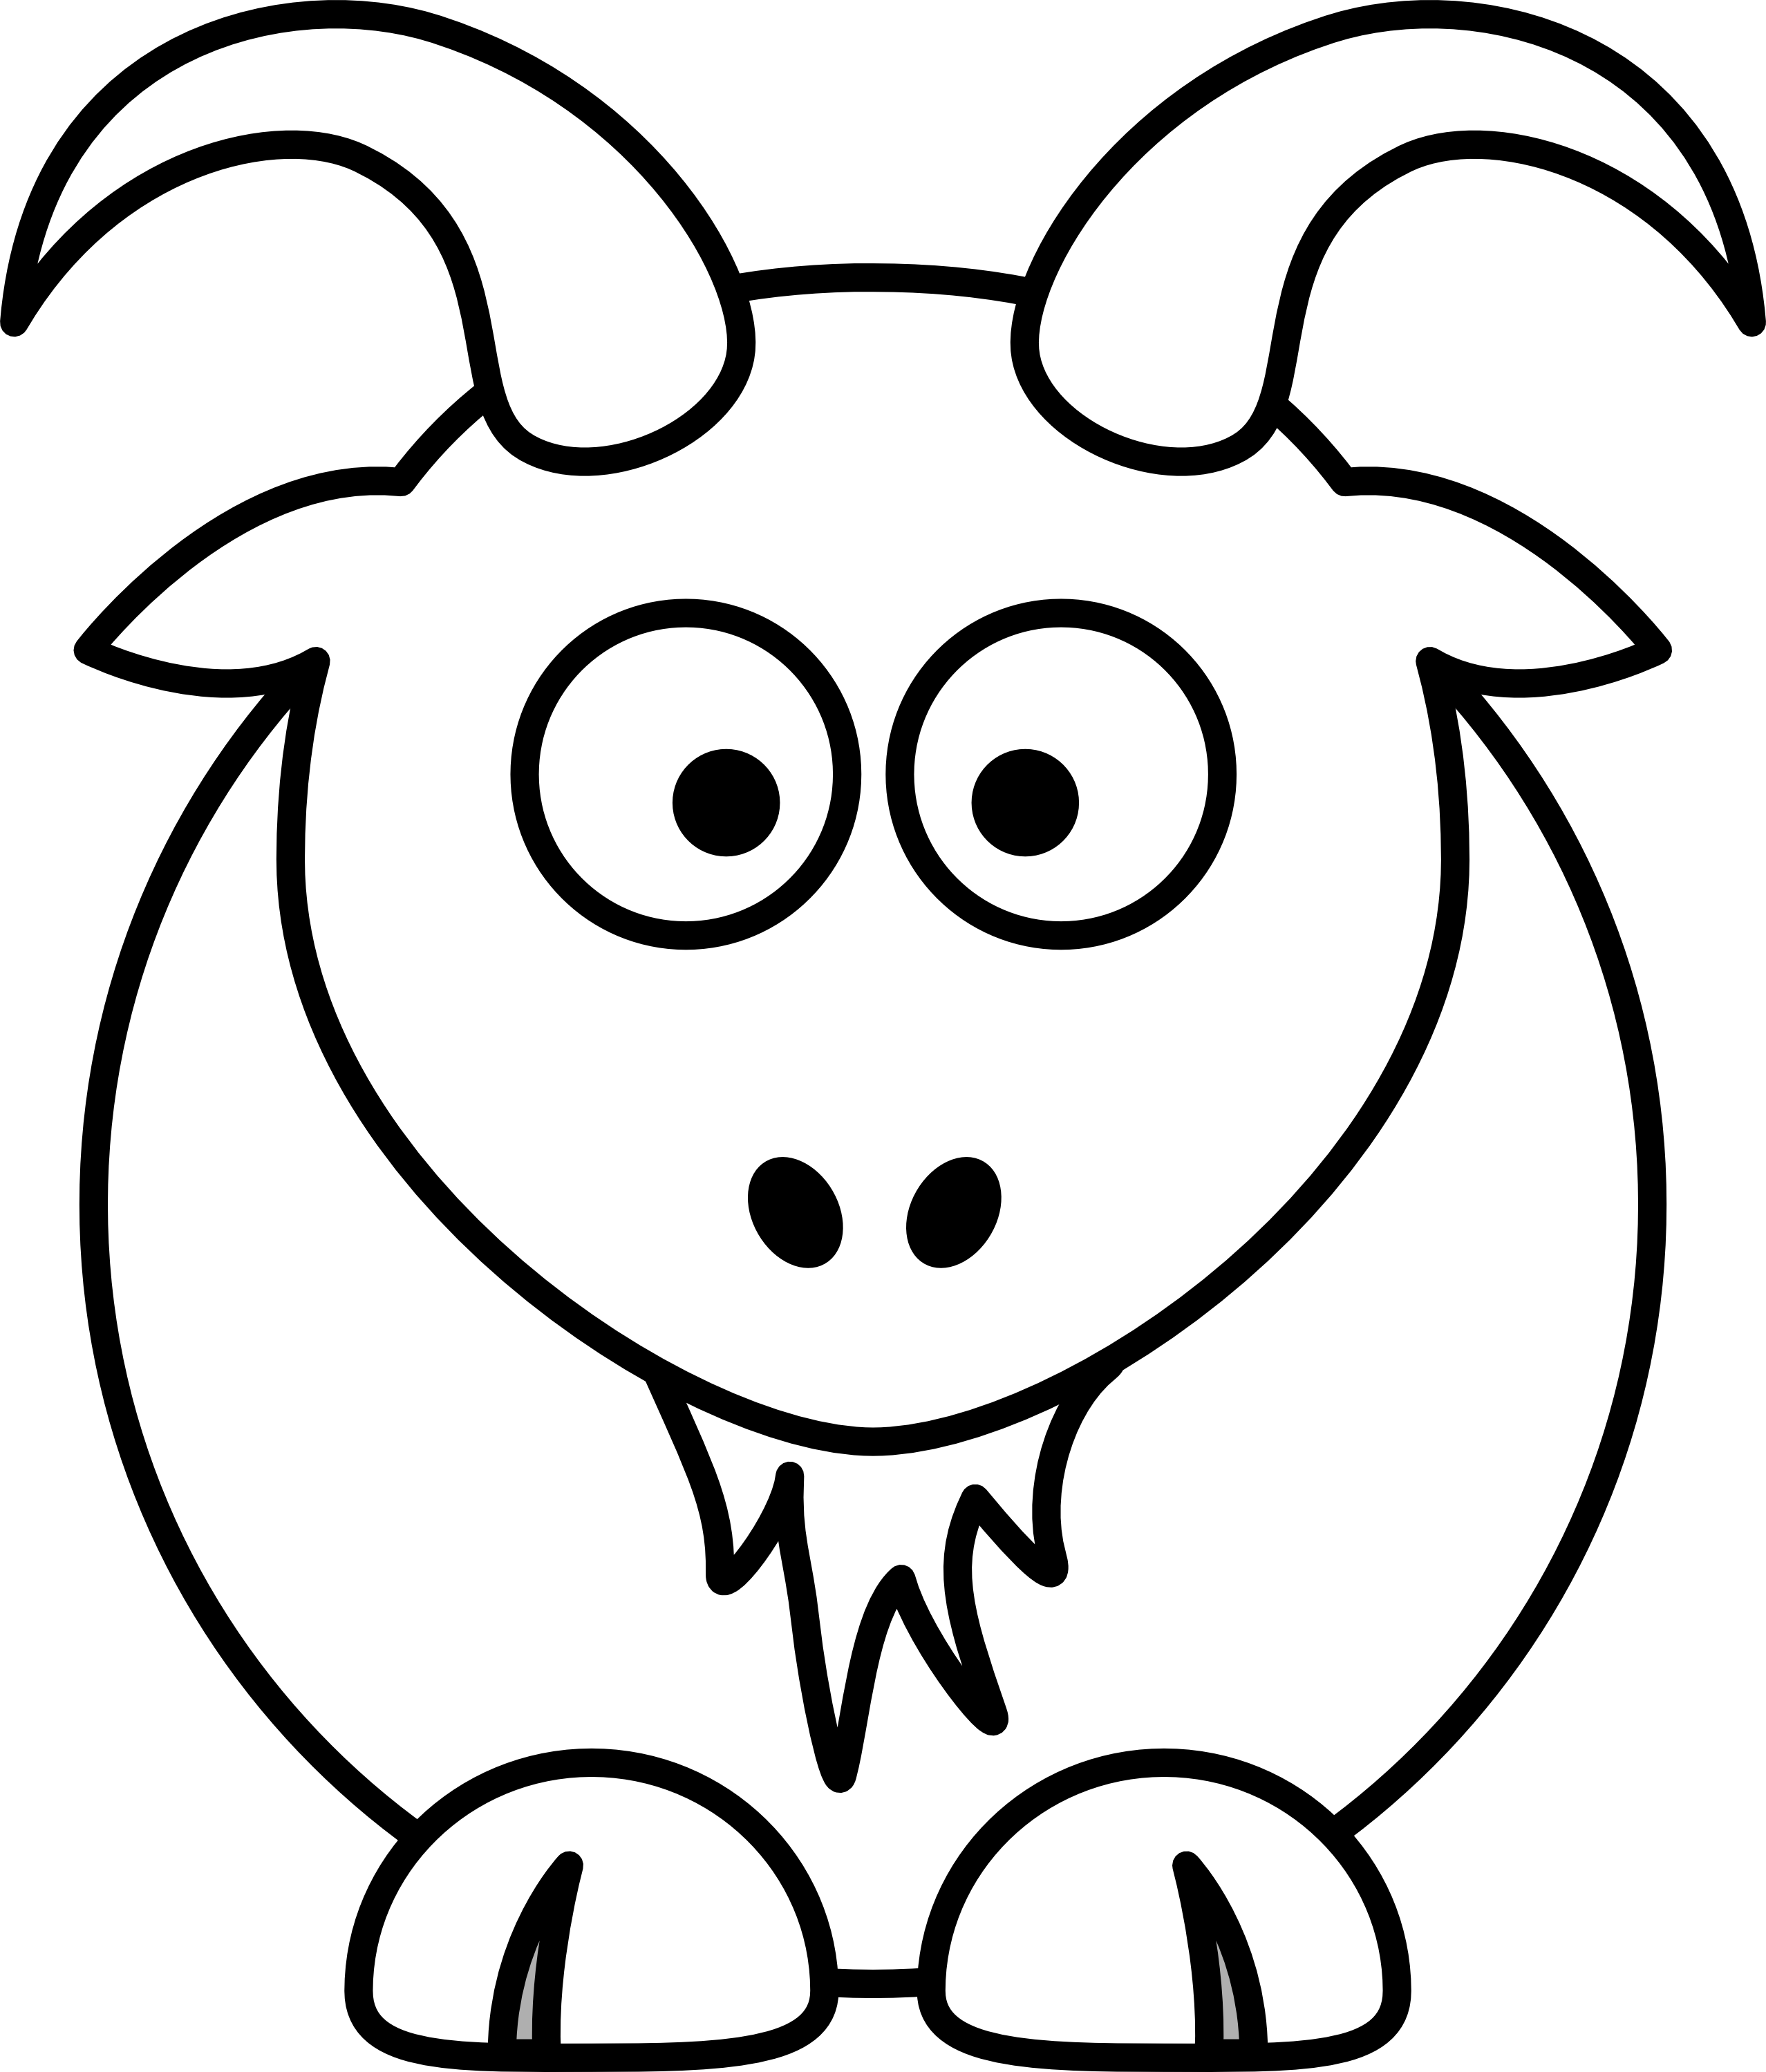 Black And White Clip Art Animals - ClipArt Best